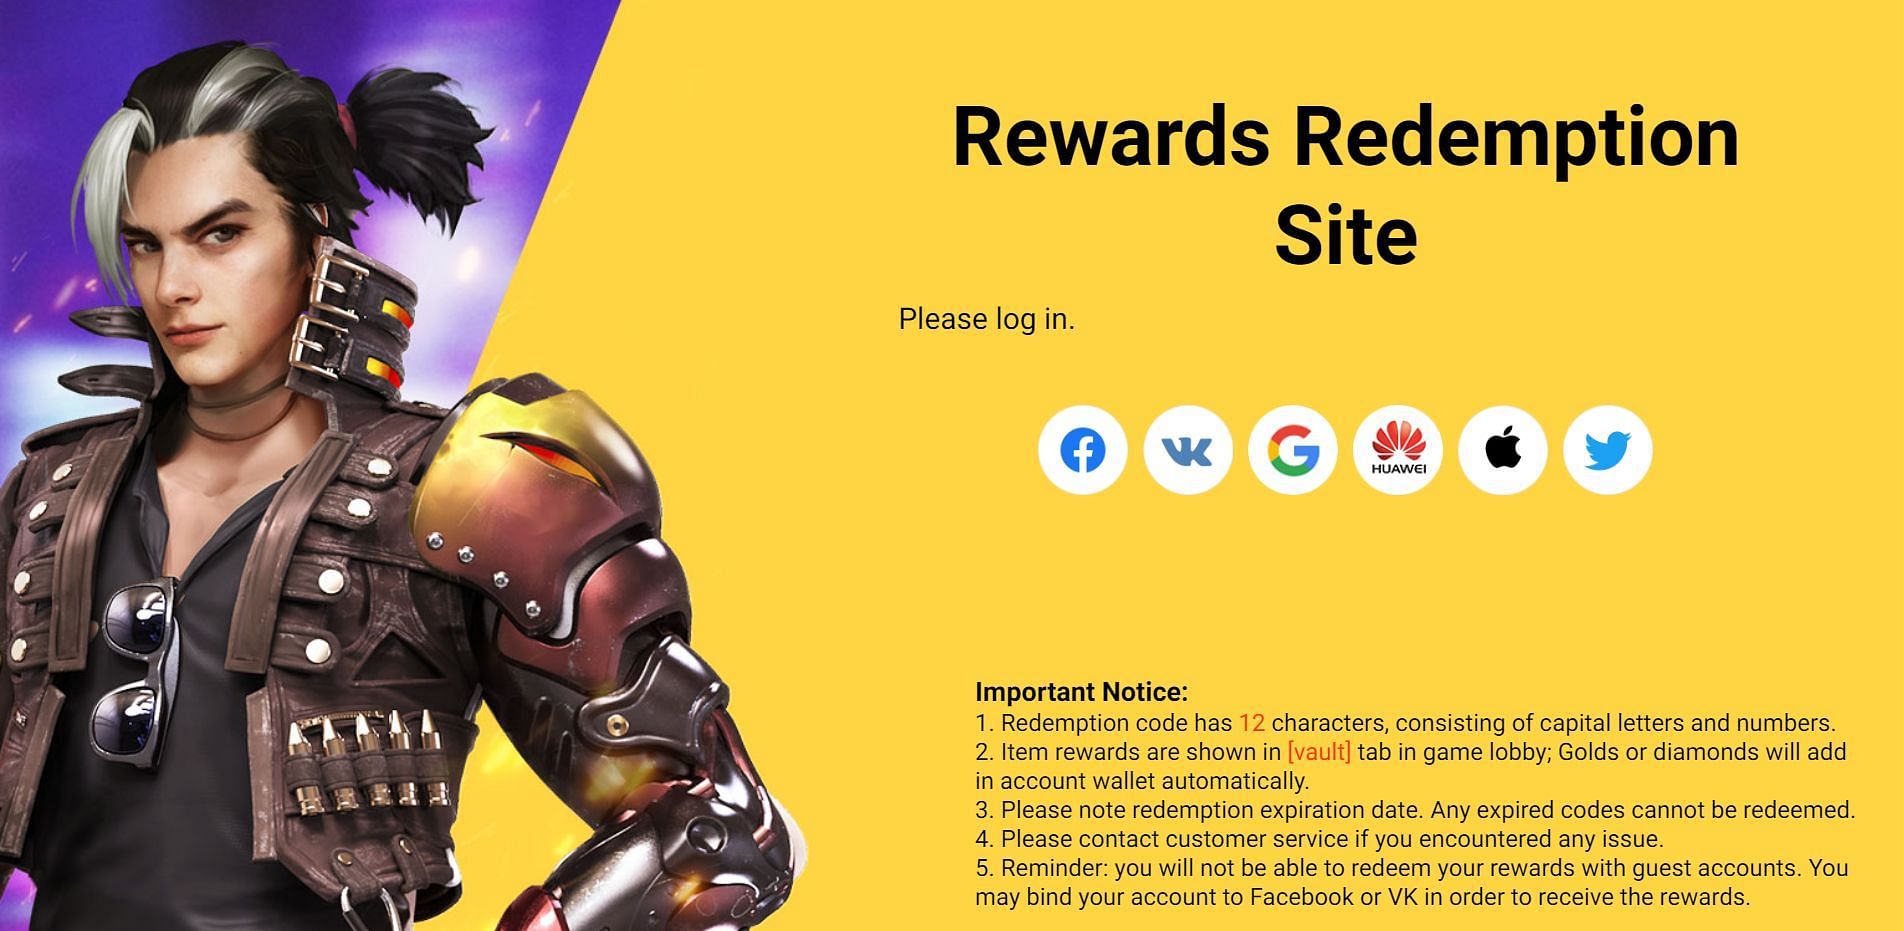 Rewards Redemption Site needs players to log in using to their Free Fire ID (Image via Free Fire)